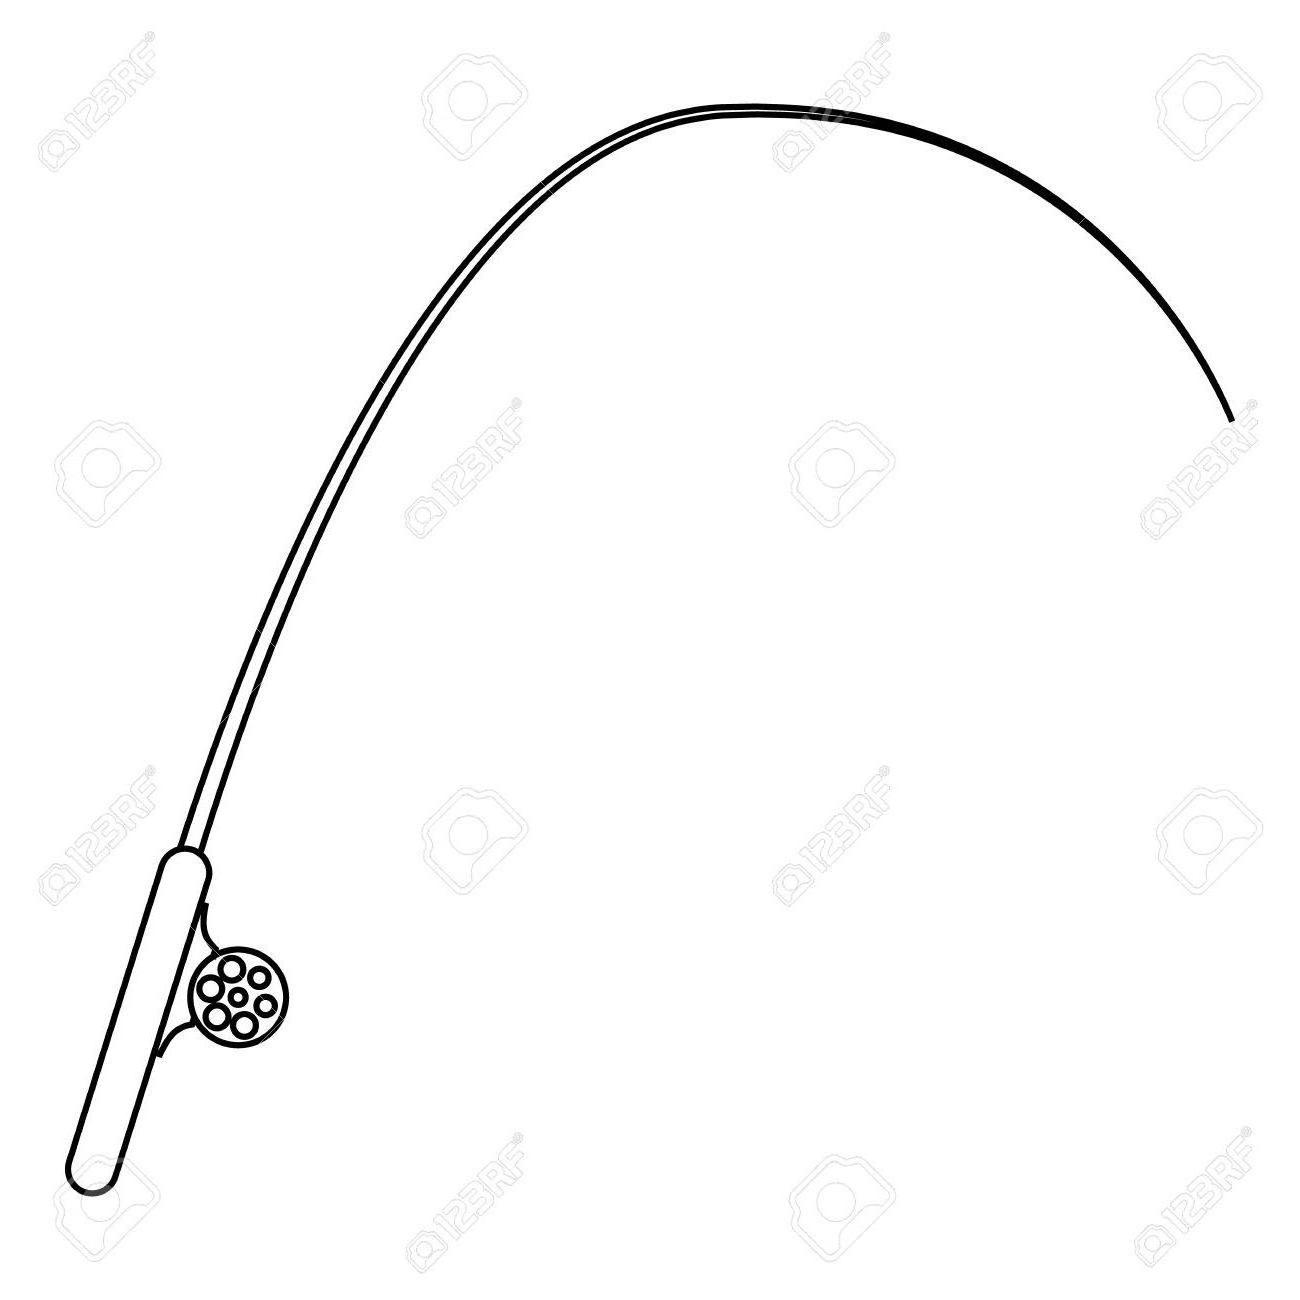 Best HD Fishing Pole Clip Art Black And White Cdr